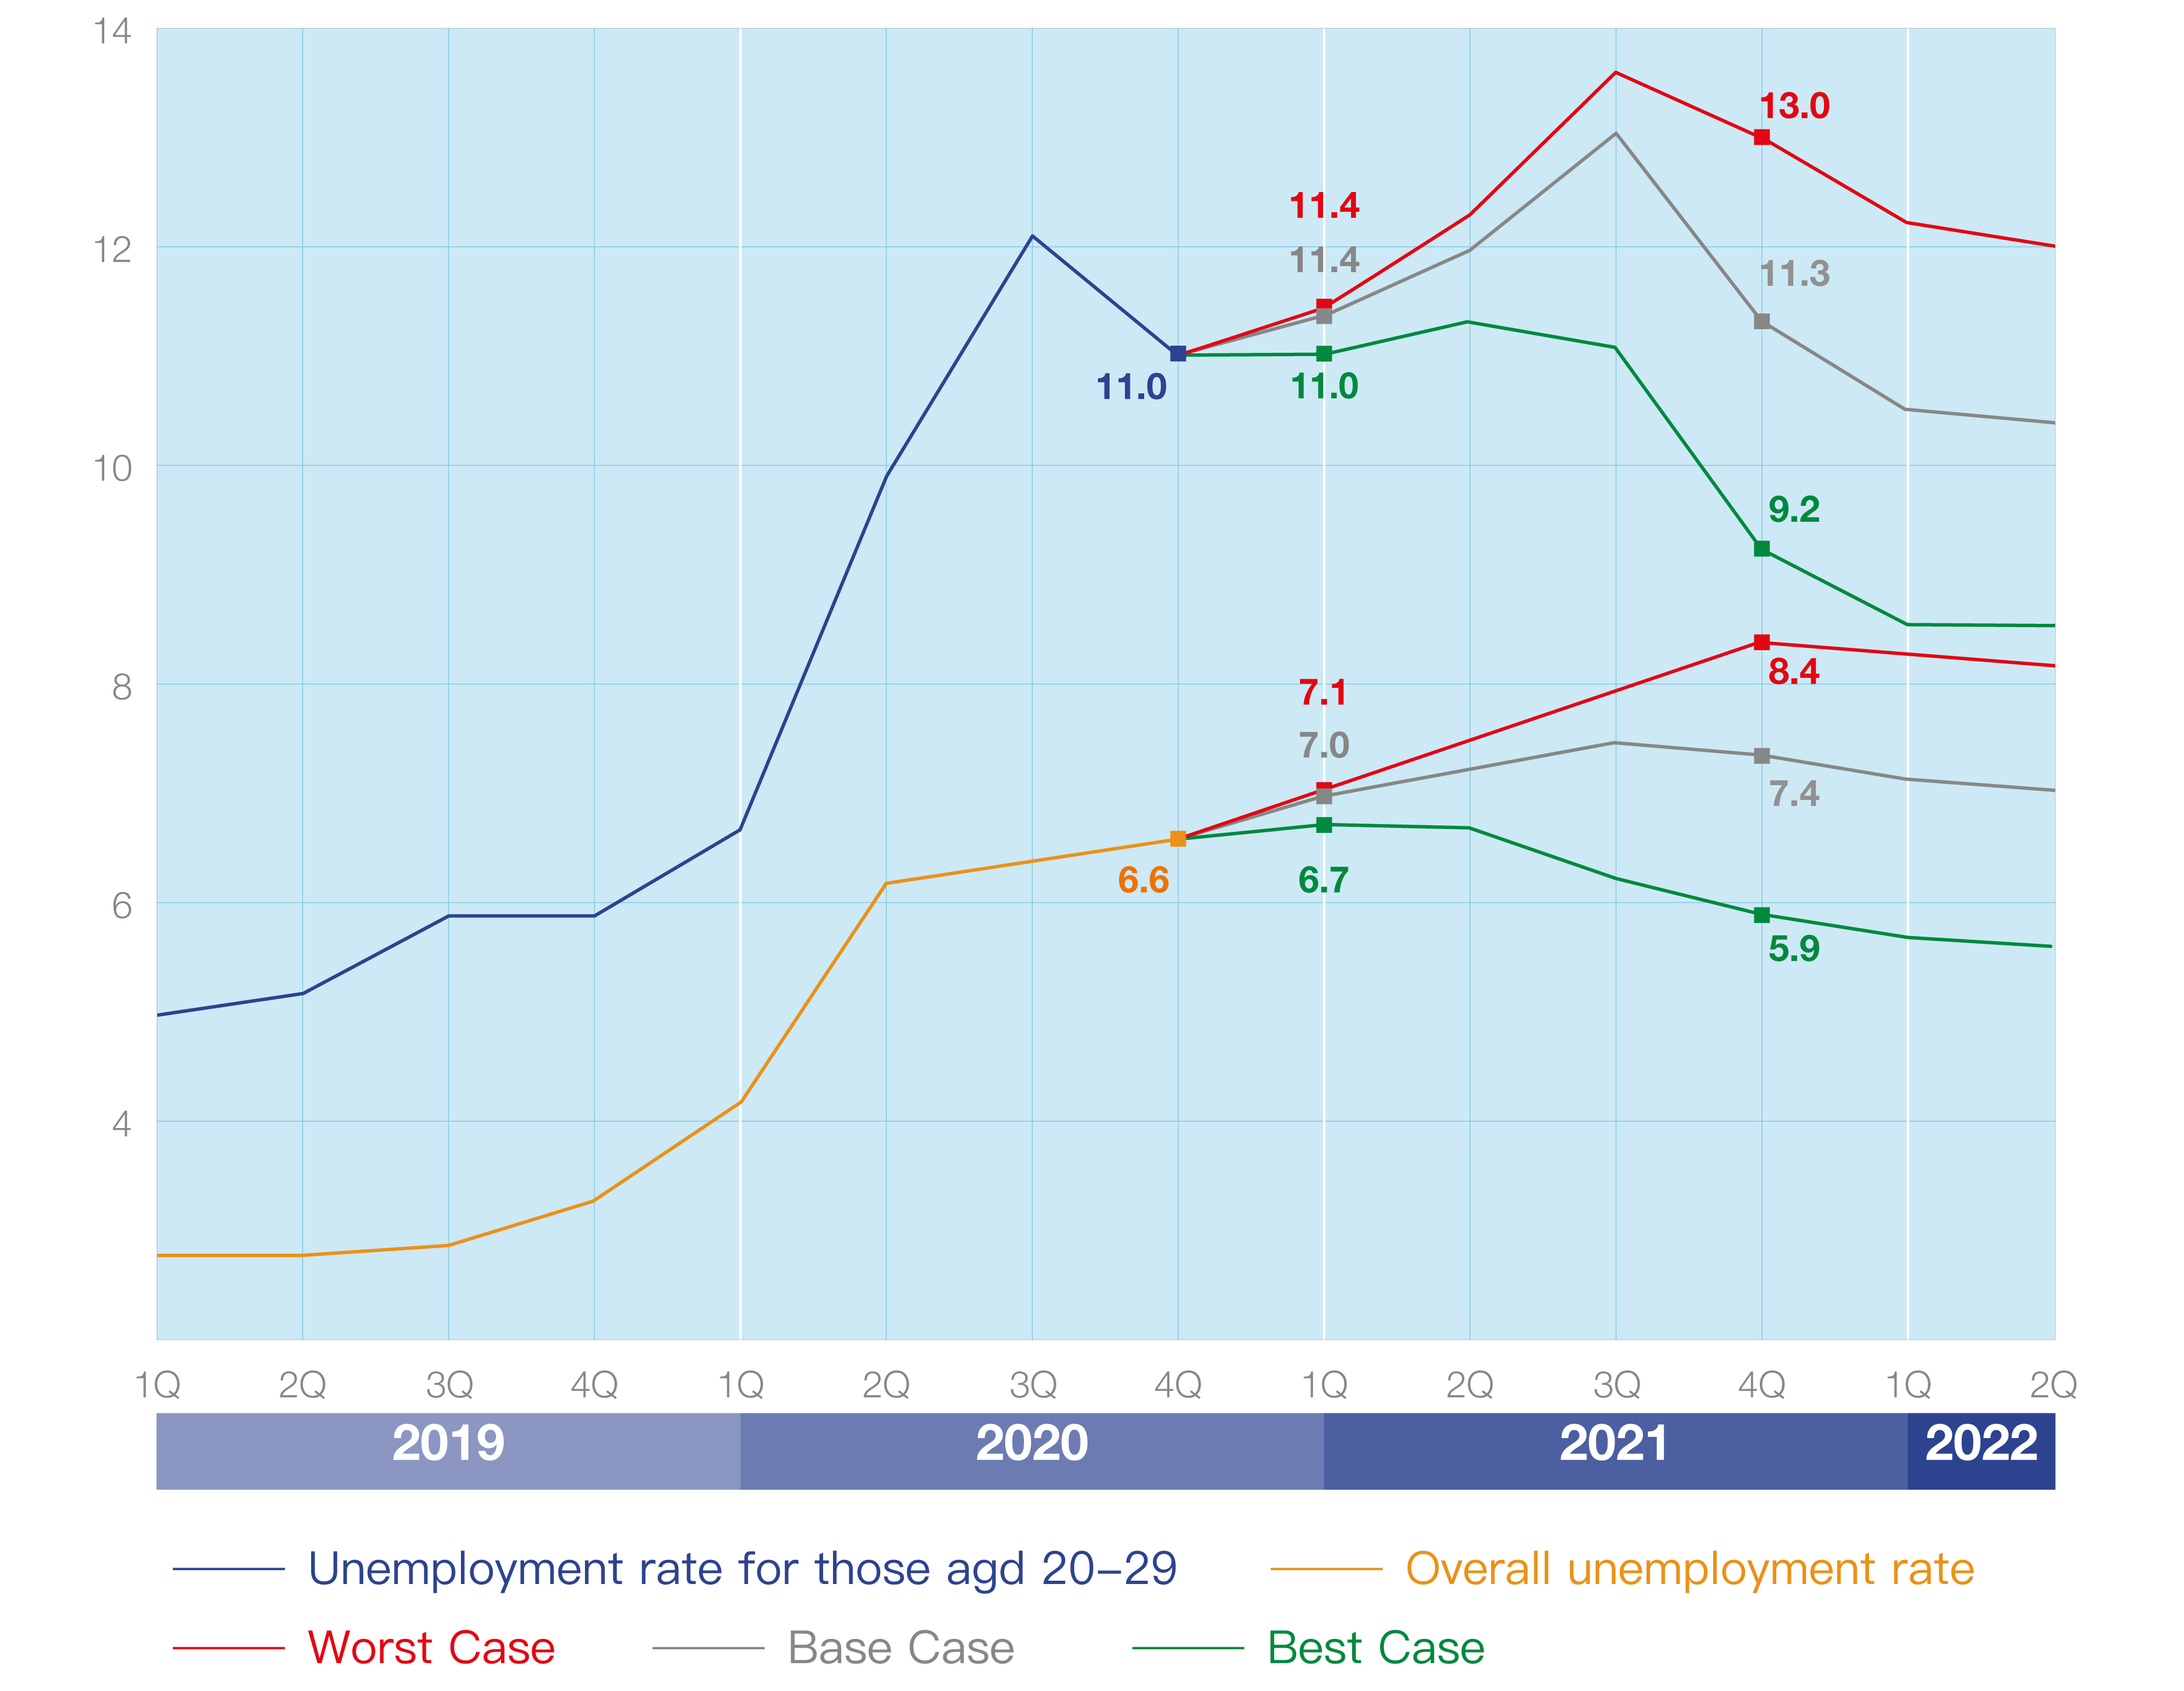 2021-22 forecast of unemployment rate for those aged 20-29 and overall unemployment rate